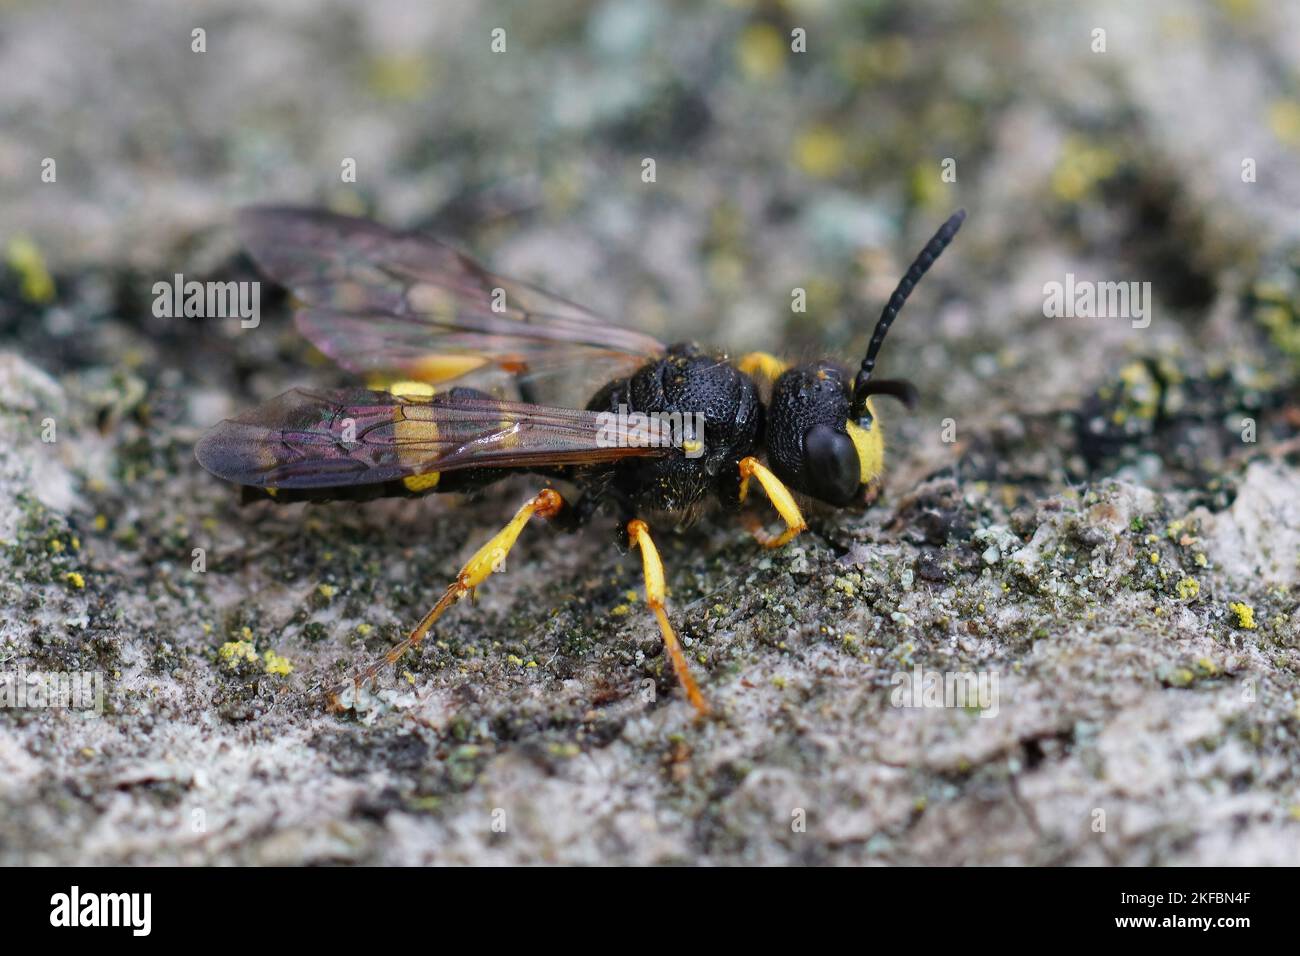 The Ornate Tailed Digger Wasp  on the stone, macro view Stock Photo